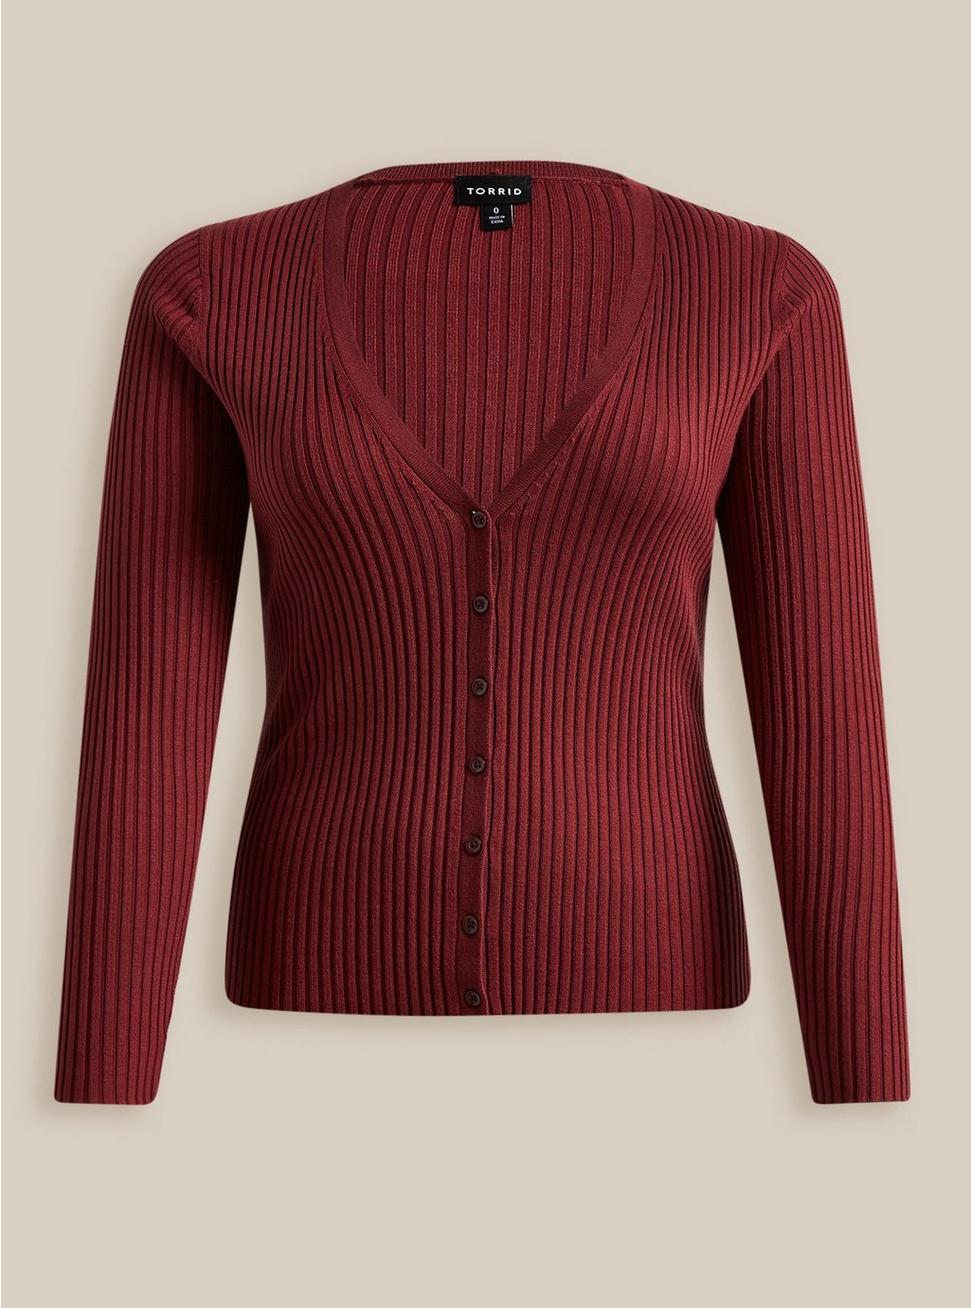 Fitted Cardigan V-Neck Sweater, MAROON, hi-res